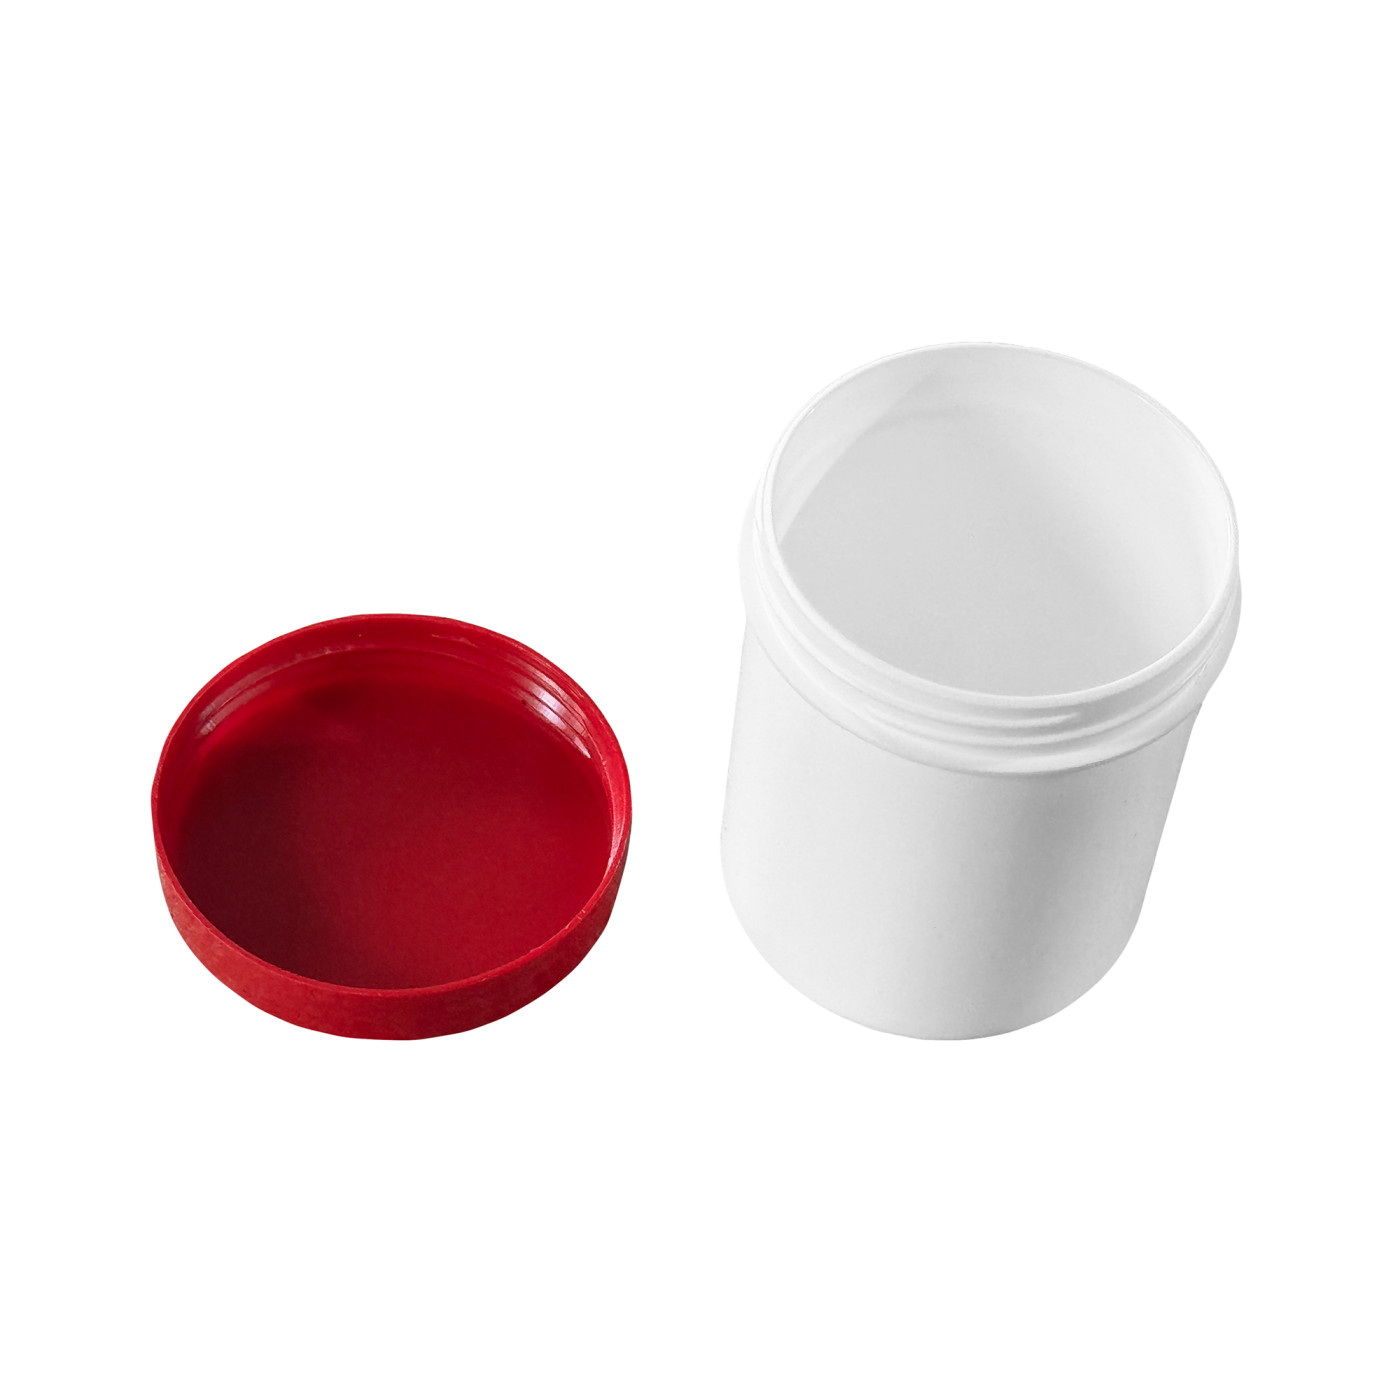 White jar with red lid (35 ml capacity, PP plastic)